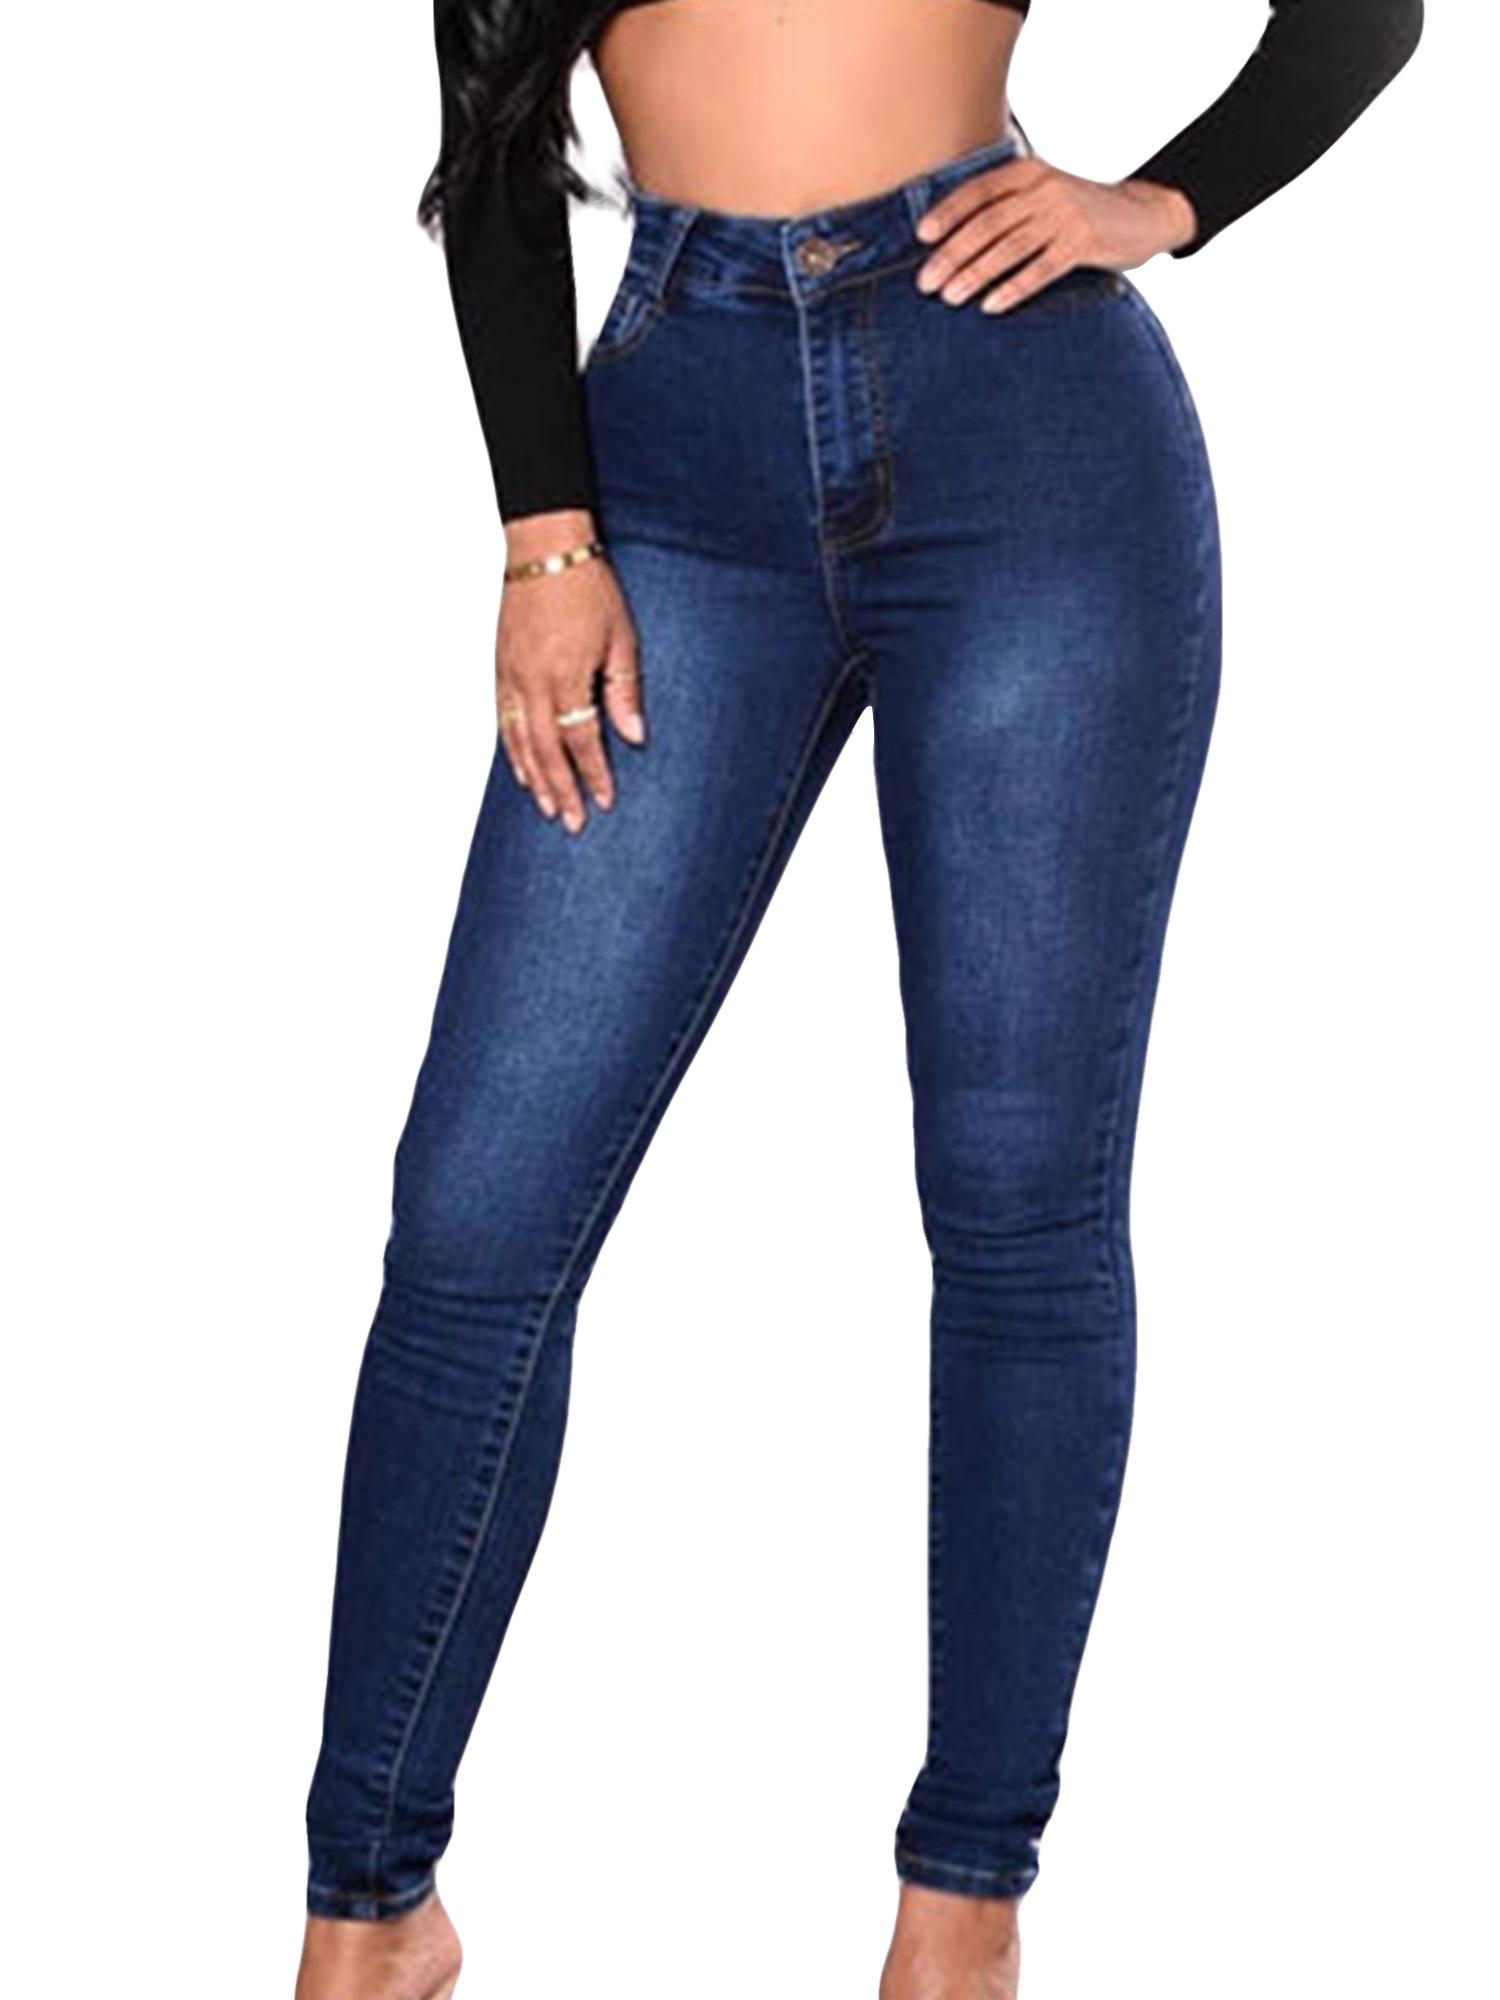 Women High Rise Distressed Solid Stretch Sexy Skinny Leg Denim Jeans Bodycon Jeggings Pencil Pants Trousers With Pockets - image 1 of 5